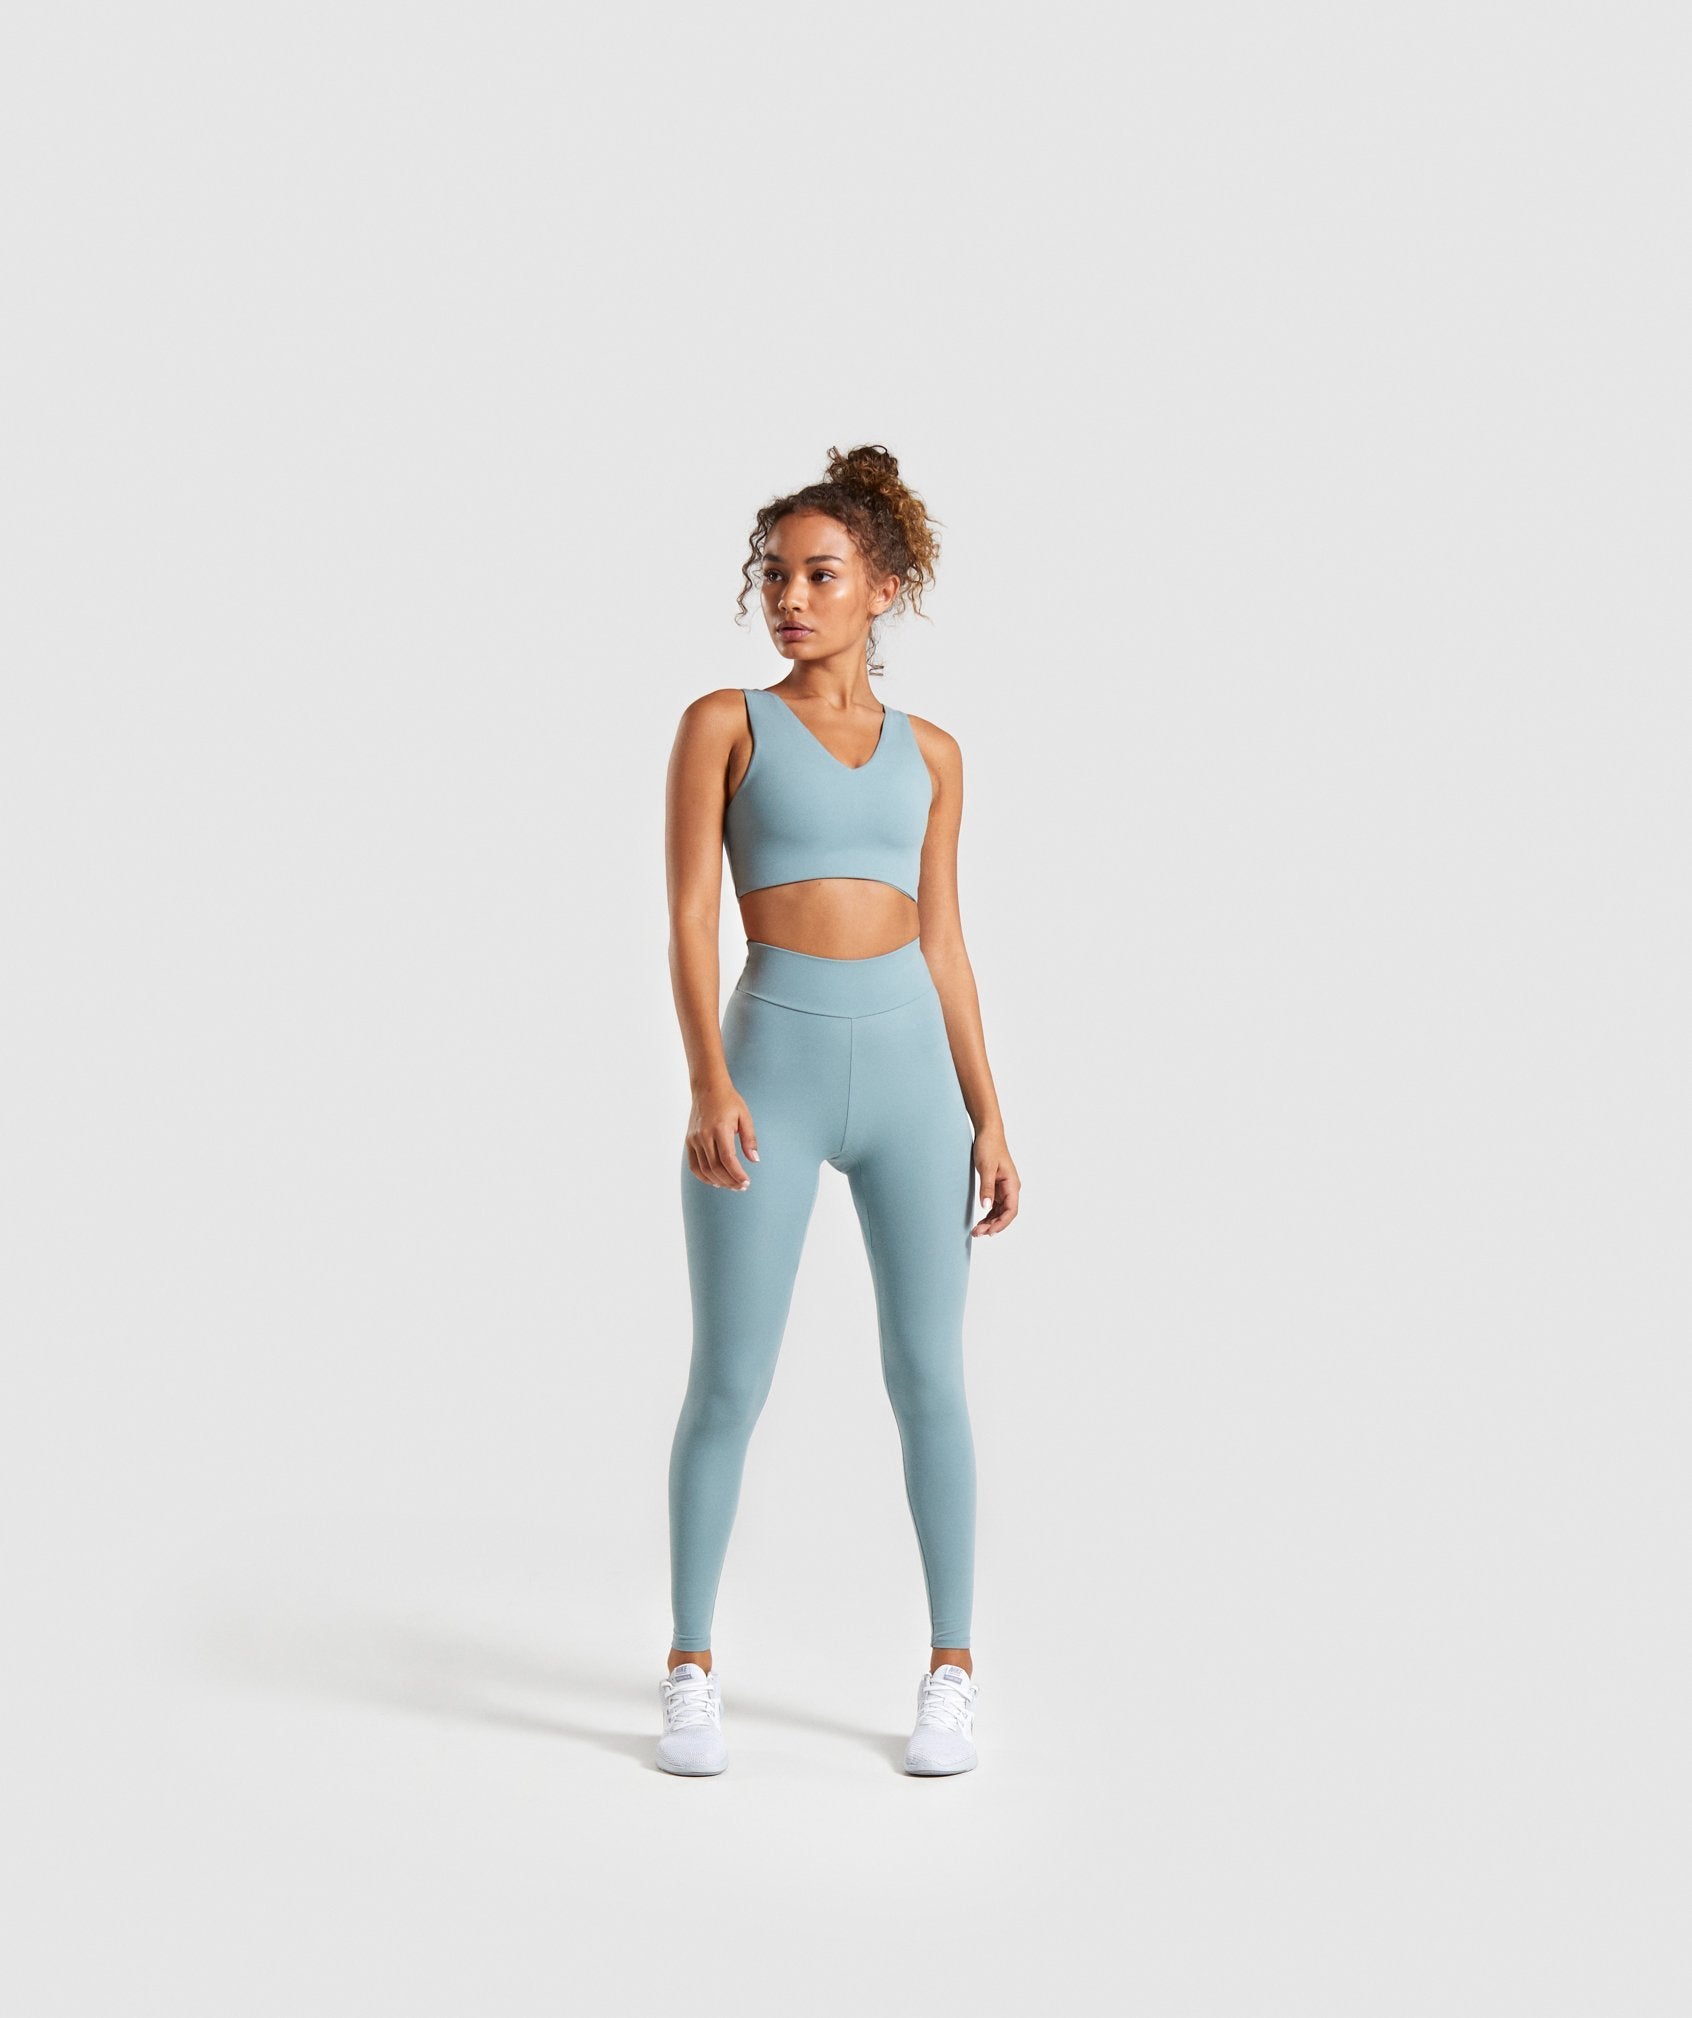 Solo Leggings in Turquoise - view 4